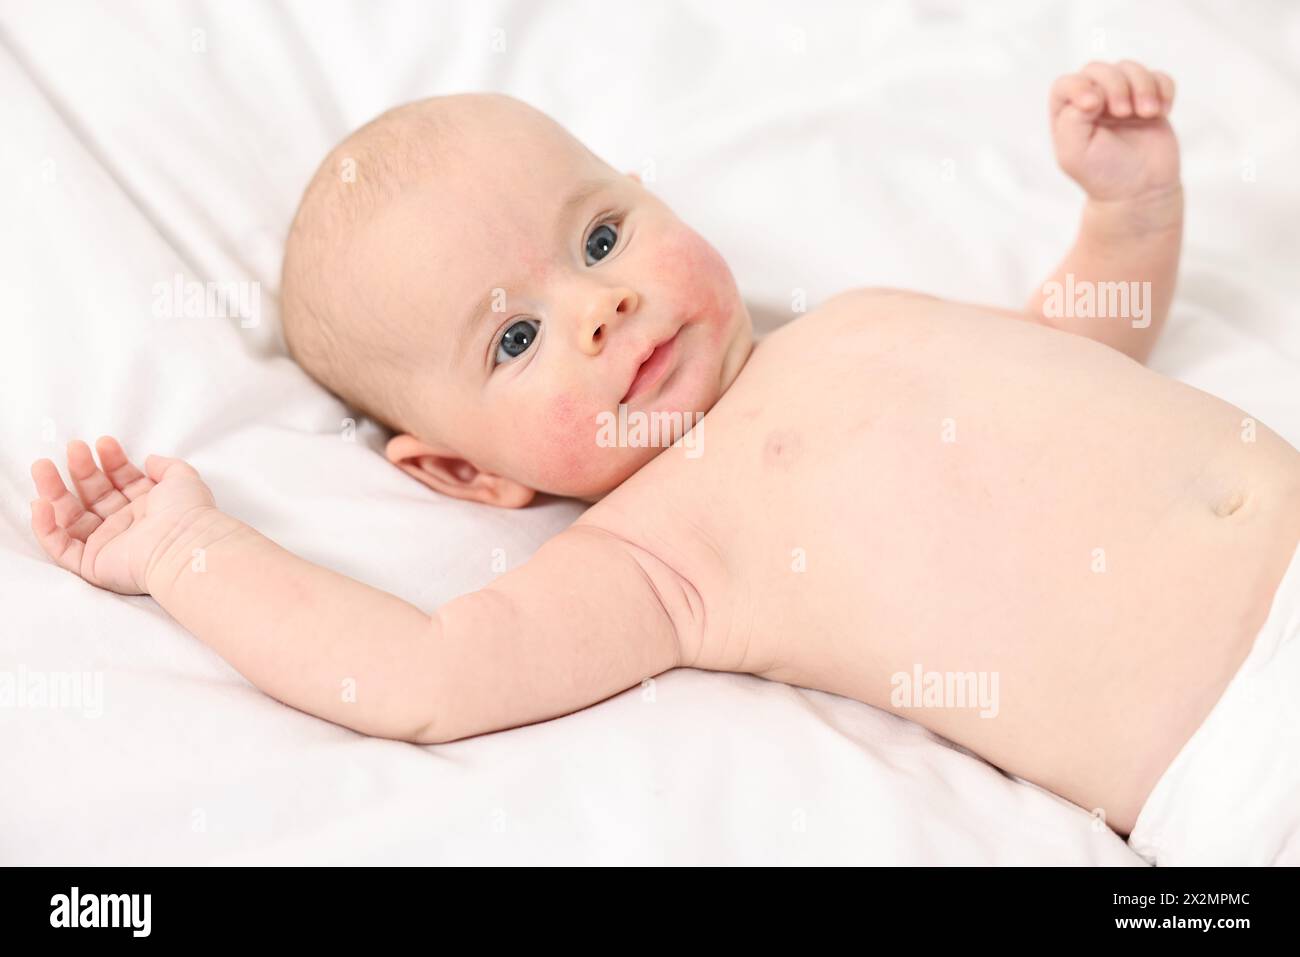 Cute little baby with allergic redness on cheeks lying on white blanket Stock Photo